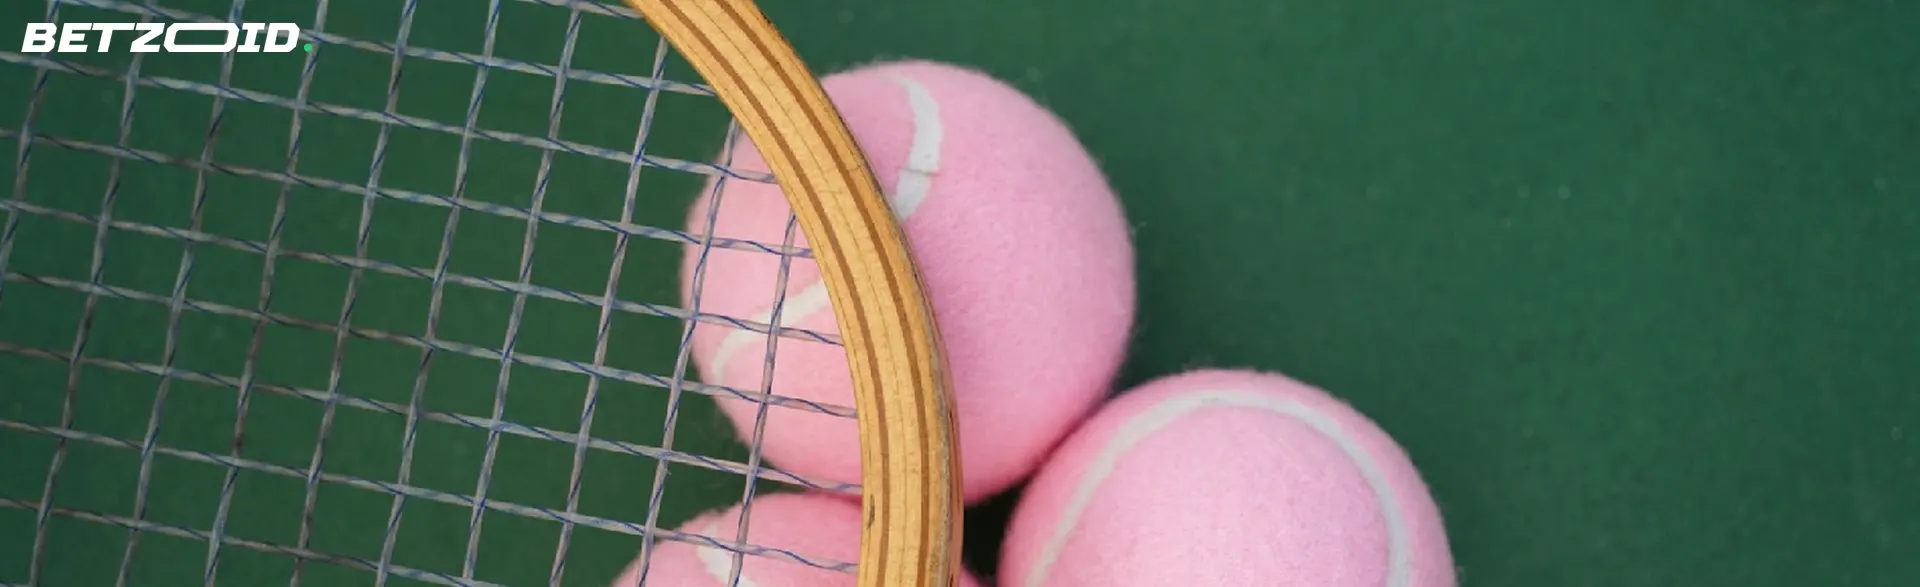 Three pink tennis balls positioned behind a tennis racket on a green court.